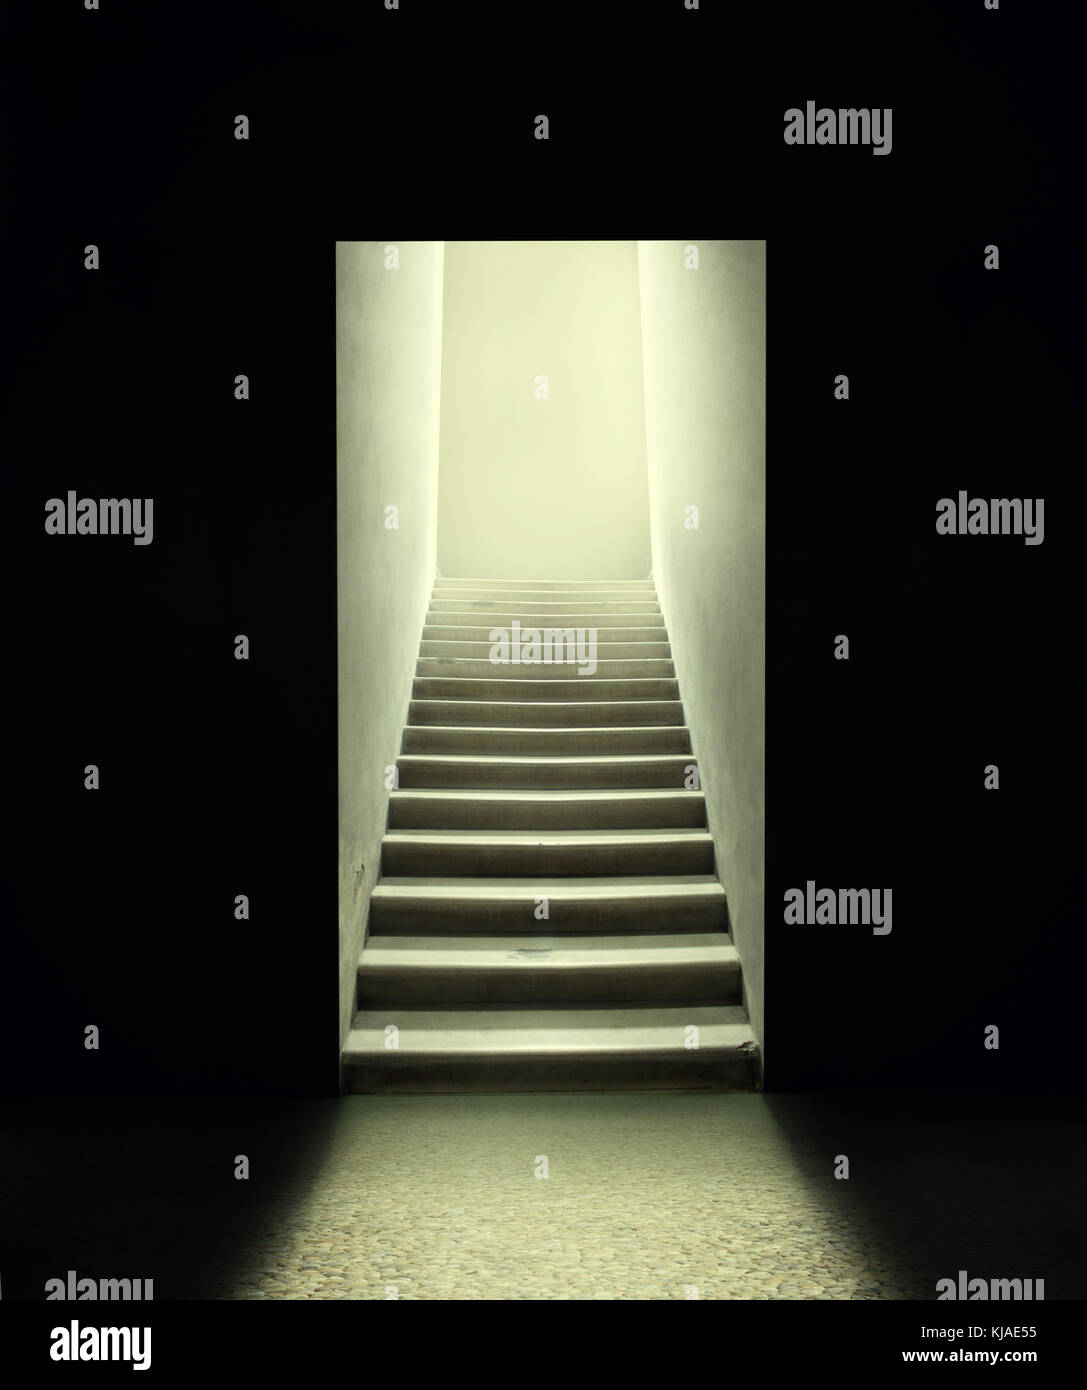 Staircase inside a room in the dark Stock Photo